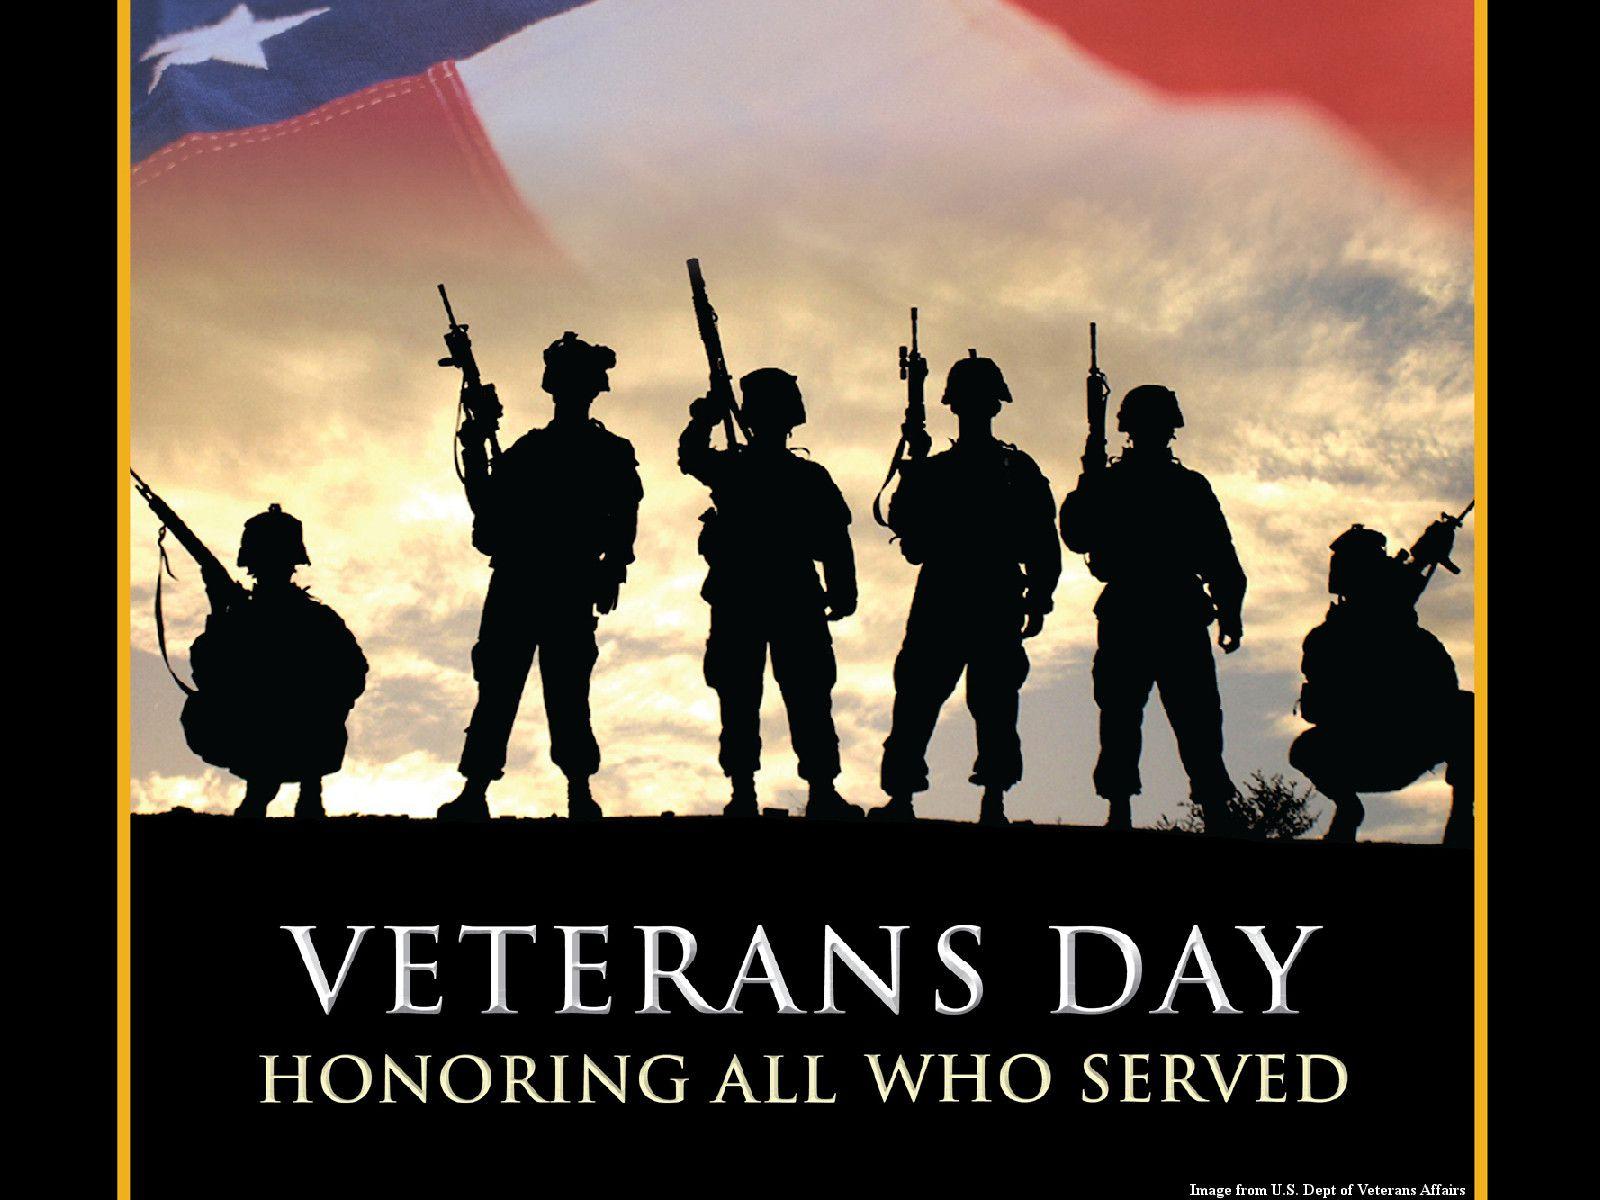 Veterans Day Profile Pics For Facebook. Veterans Day Image